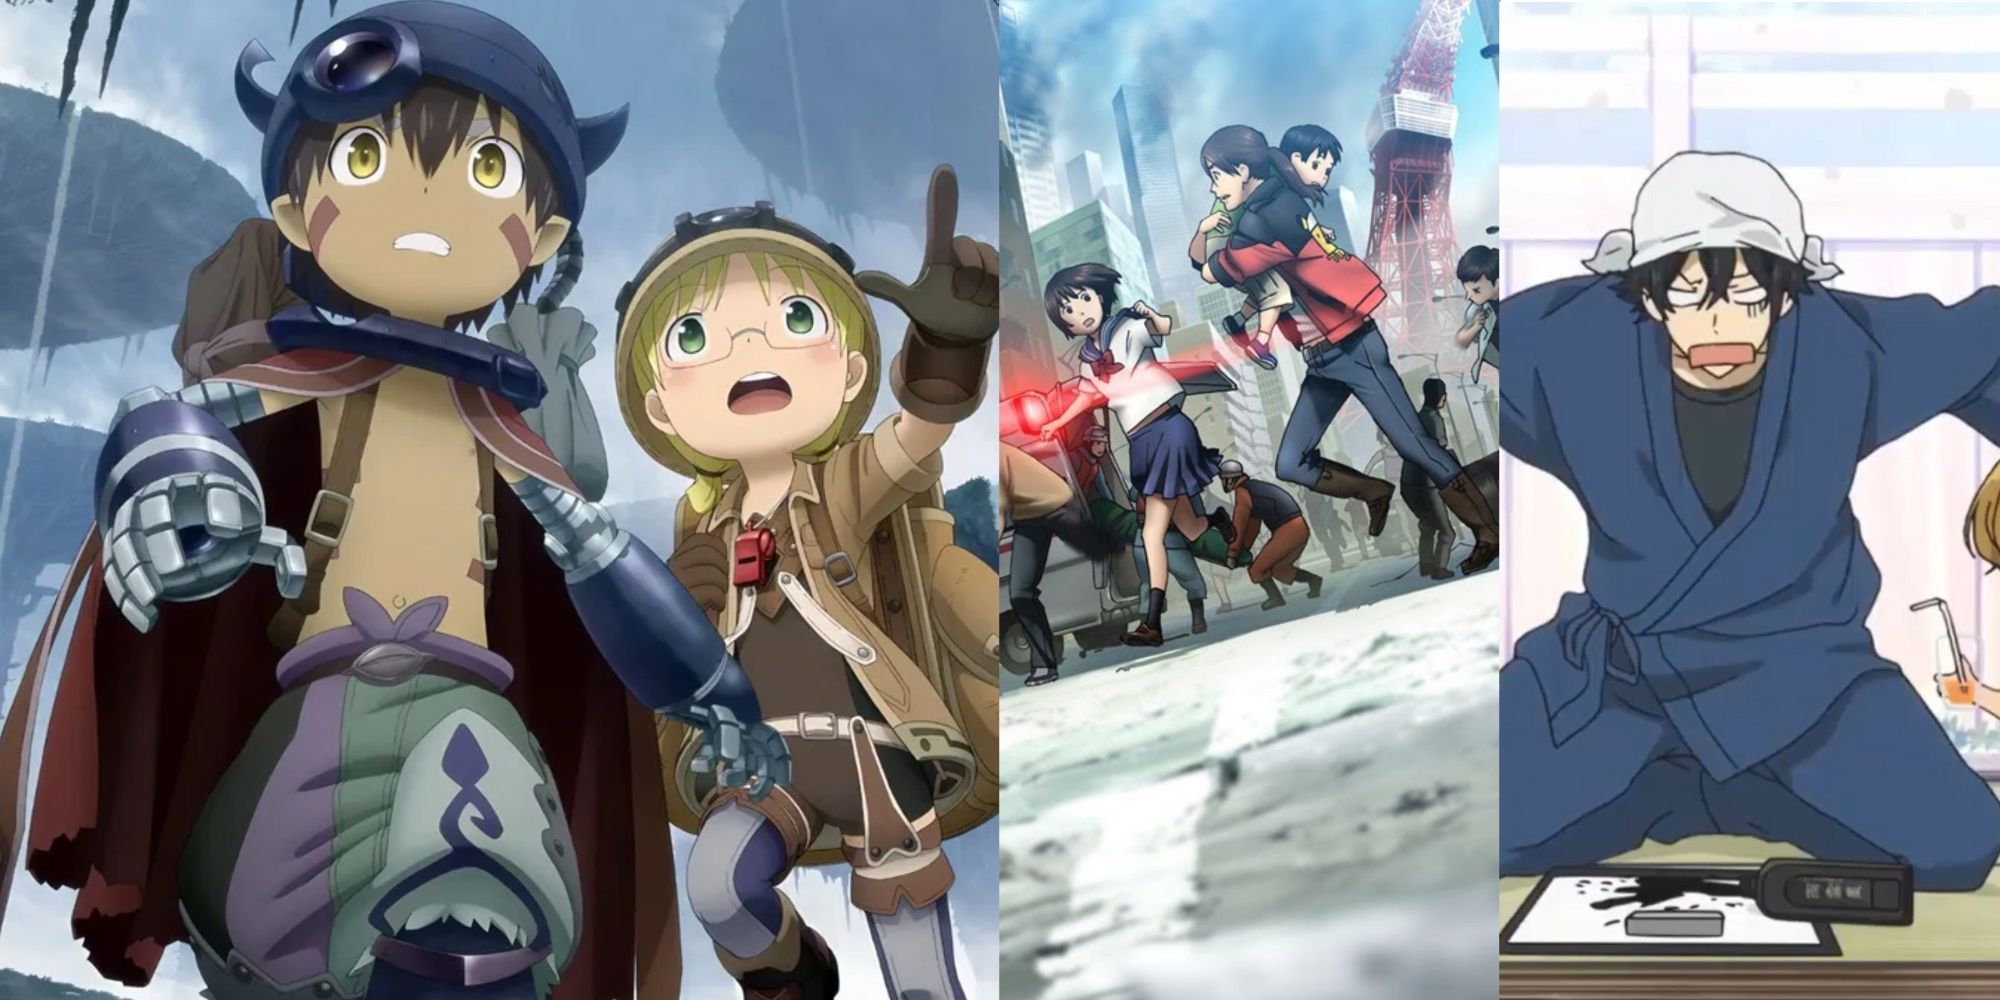 Made in abyss, Tokyo Magnitude and Barakamon